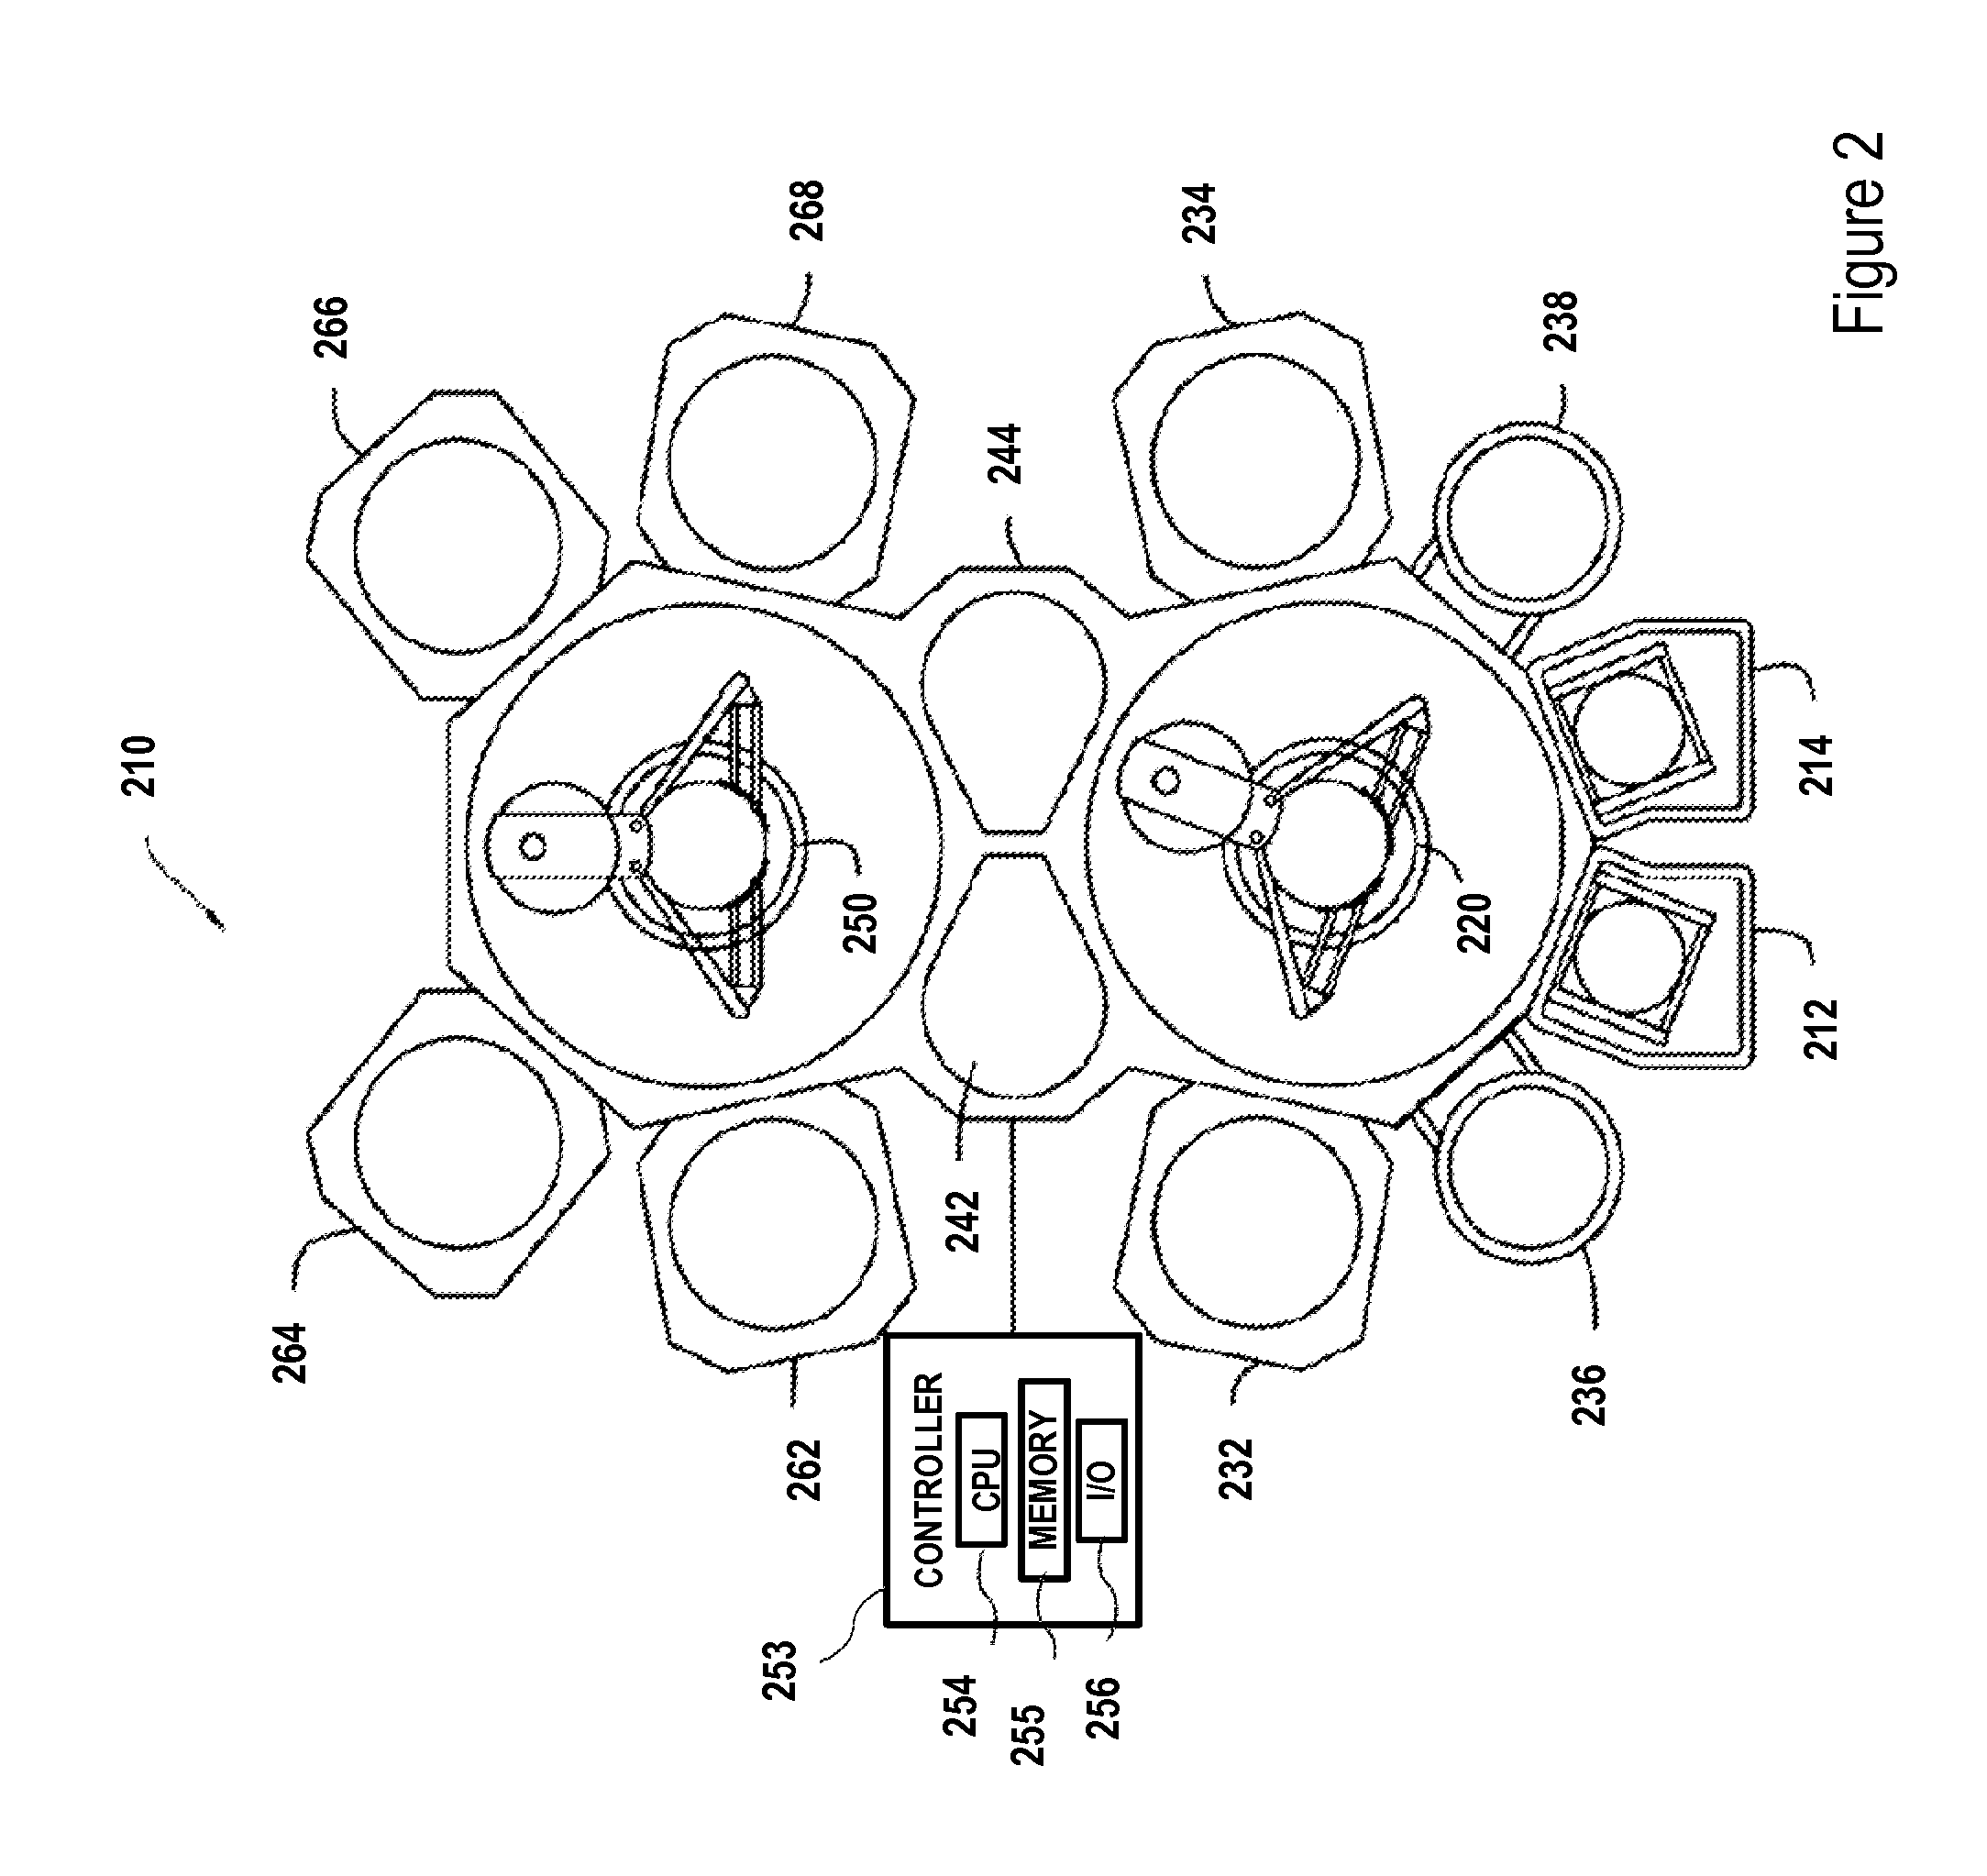 Methods And Apparatus For Forming Tantalum Silicate Layers On Germanium Or III-V Semiconductor Devices